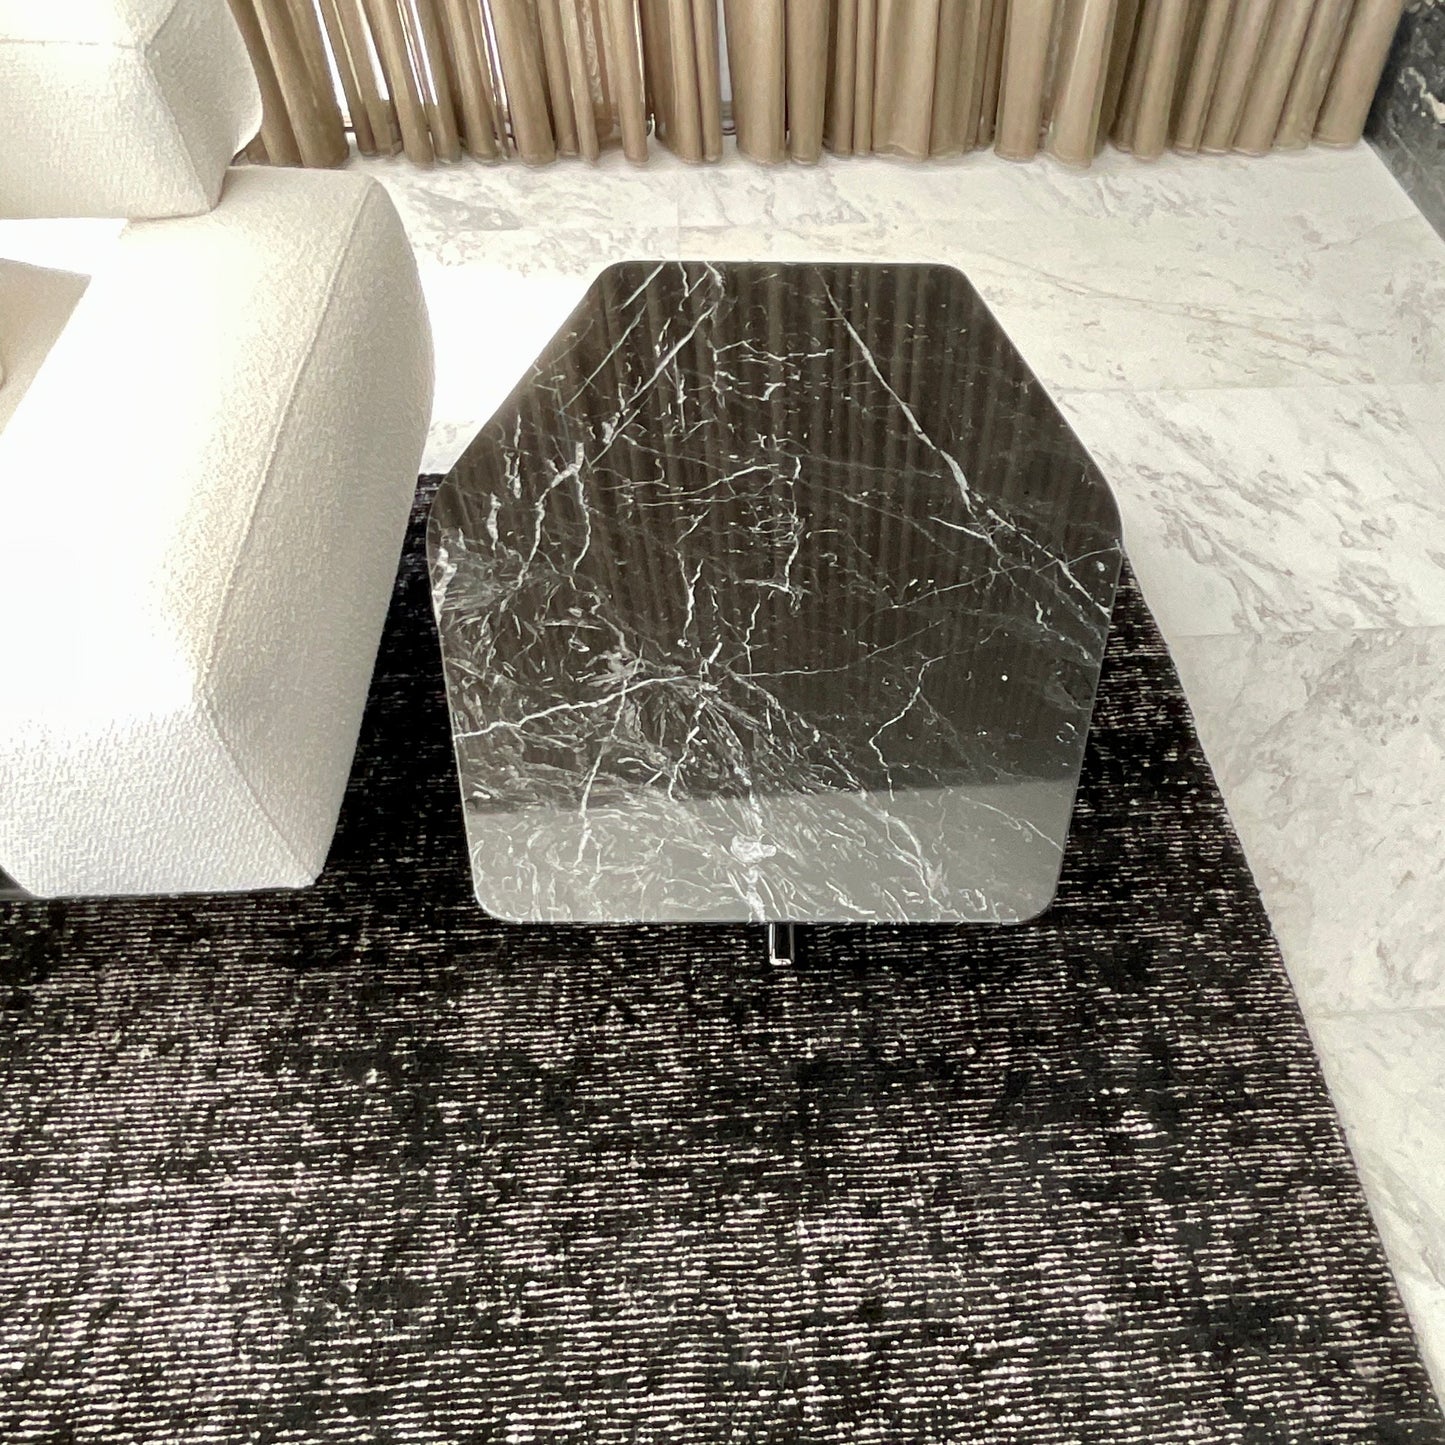 Sveva Marble Occassional Table by Carlo Colombo for Flexform